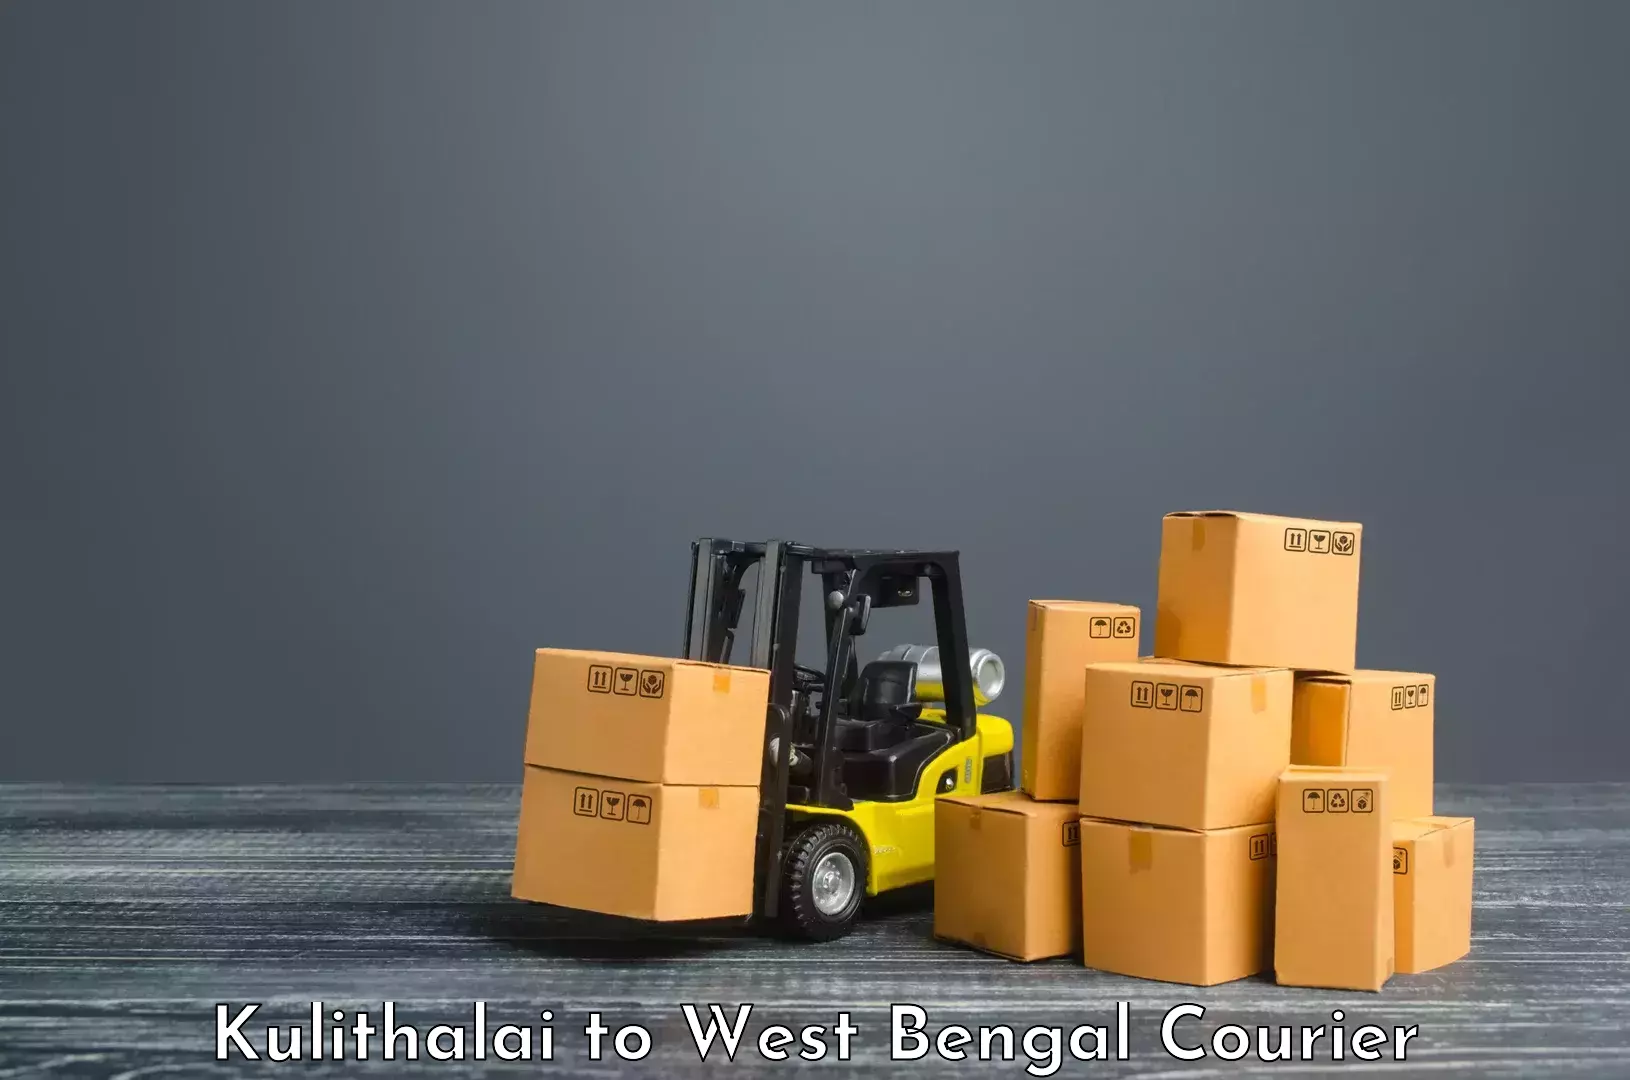 Subscription-based courier Kulithalai to West Bengal